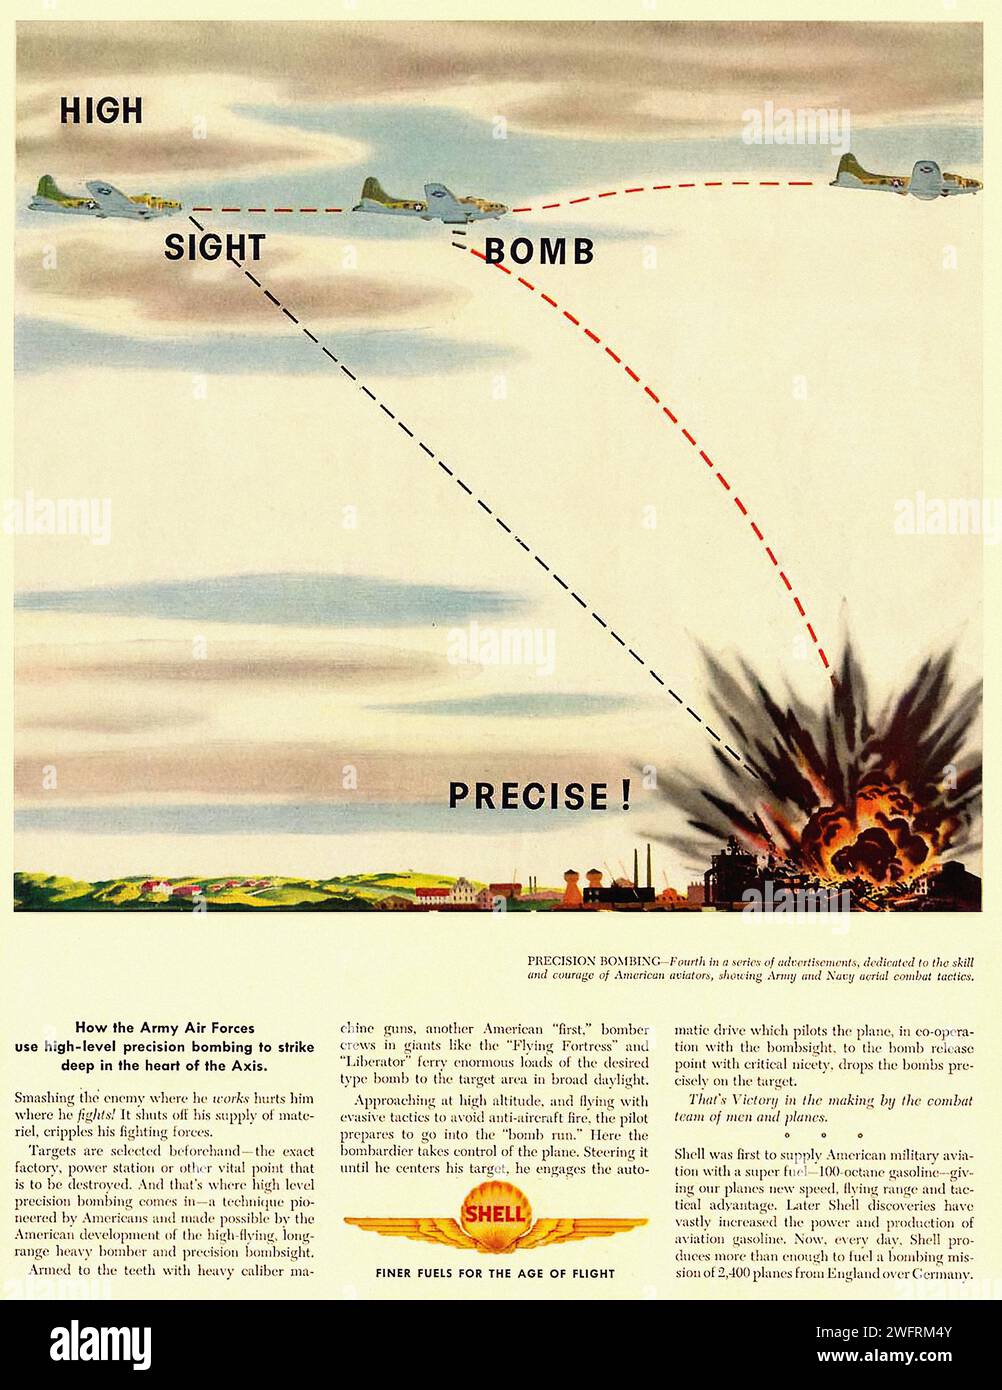 “HIGH SIGHT BOMB PRECISE!”  A World War II era American advertisement poster for the US Army Air Forces, featuring a bomber plane flying over a landscape with mountains in the background. The bomber is dropping bombs on a target, depicted as a red circle with a white cross. The poster is divided into two sections, with the top half showcasing the illustration and the bottom half dedicated to text. The style of the poster is characterized by its beige background and red border, with text in black and red. The word “PRECISE!” is emphasized in a larger font and in red. - American (U.S.) advertisi Stock Photo